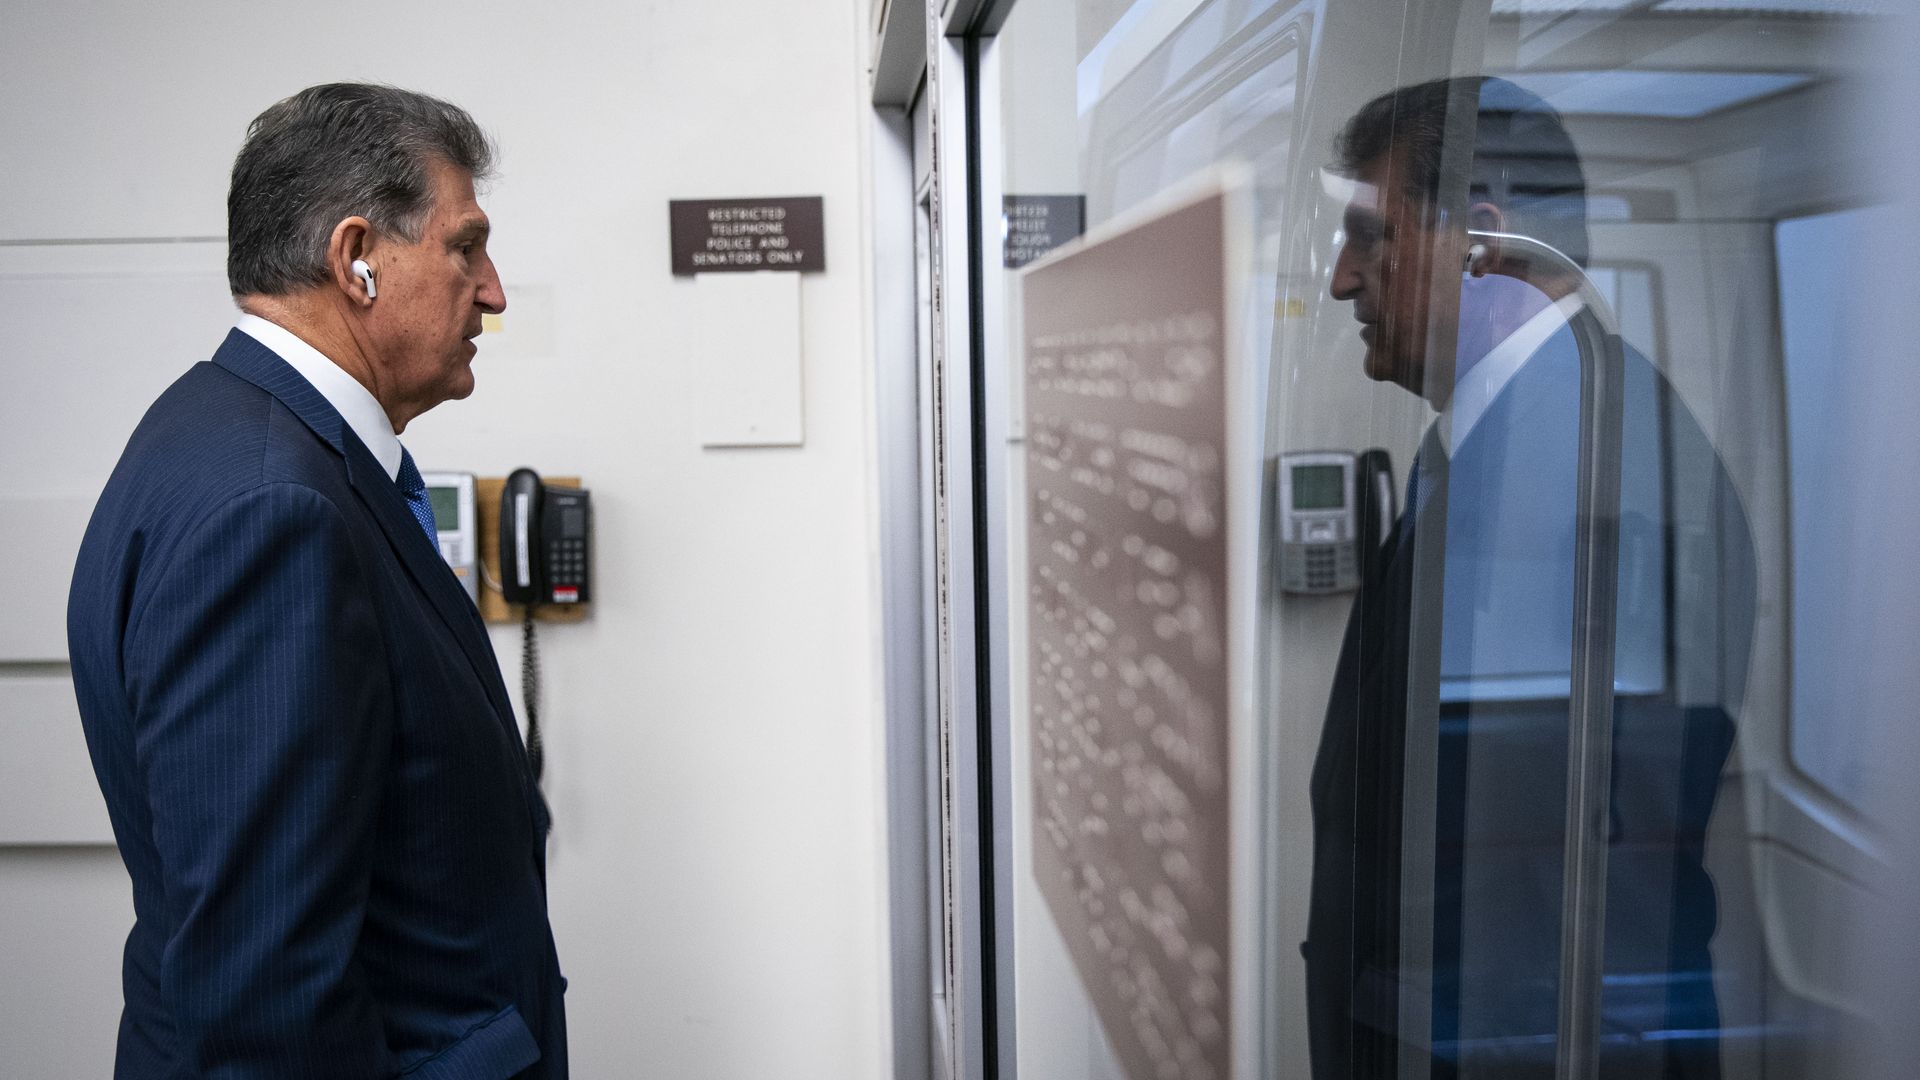 Sen. Joe Manchin and his reflection are seen as he speaks in a Senate subway car.